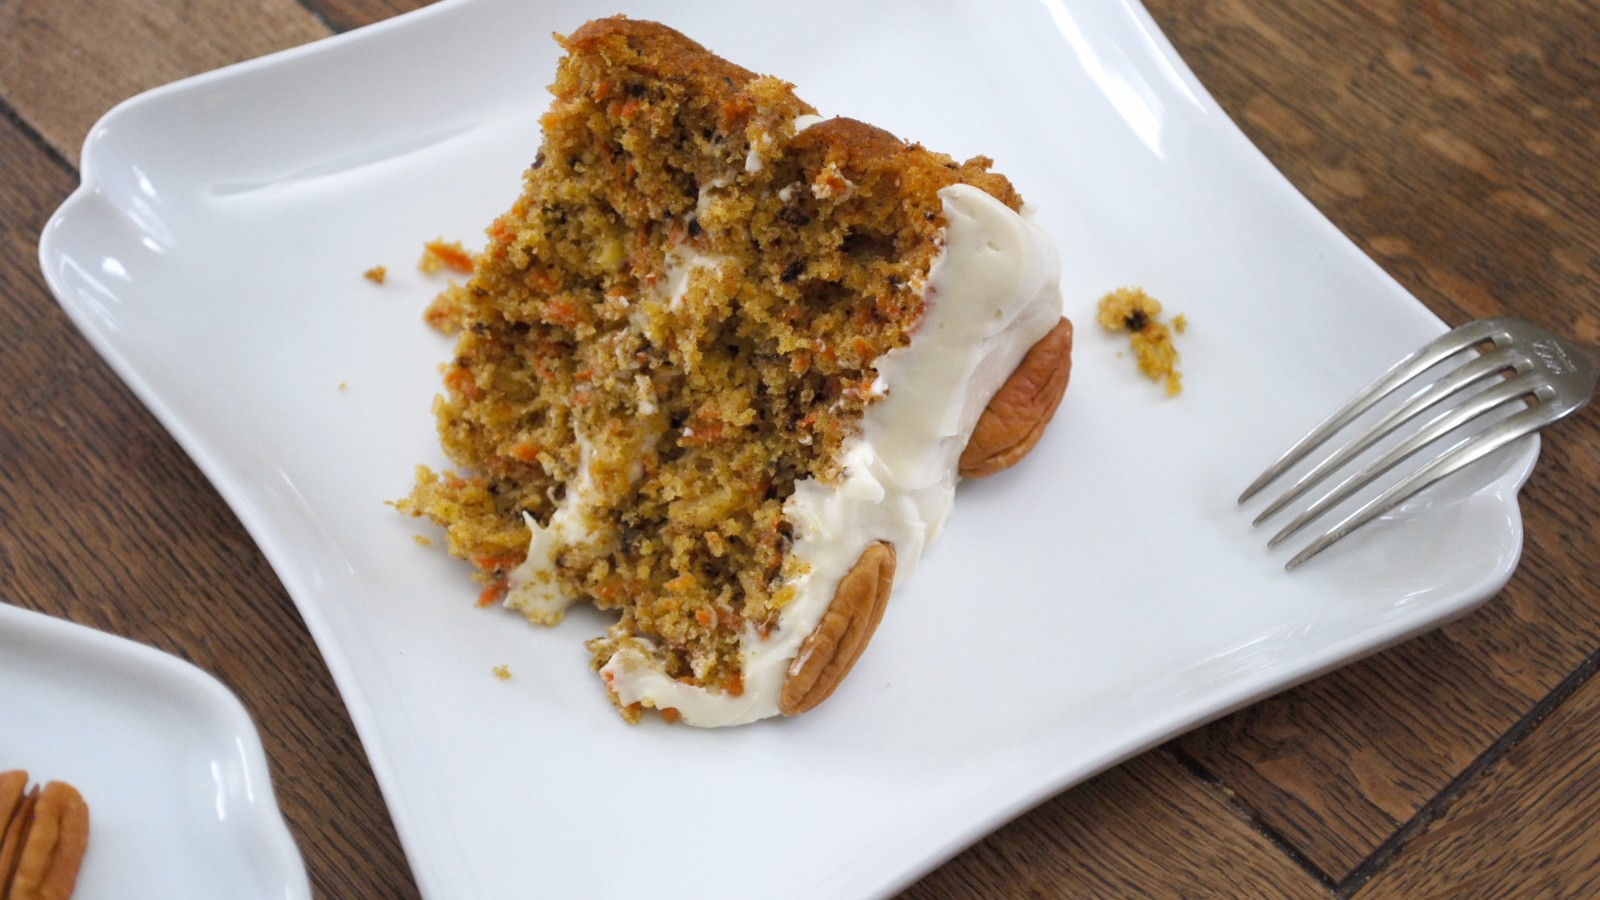 Image of Carrot Cake with Vanilla Cake Mix